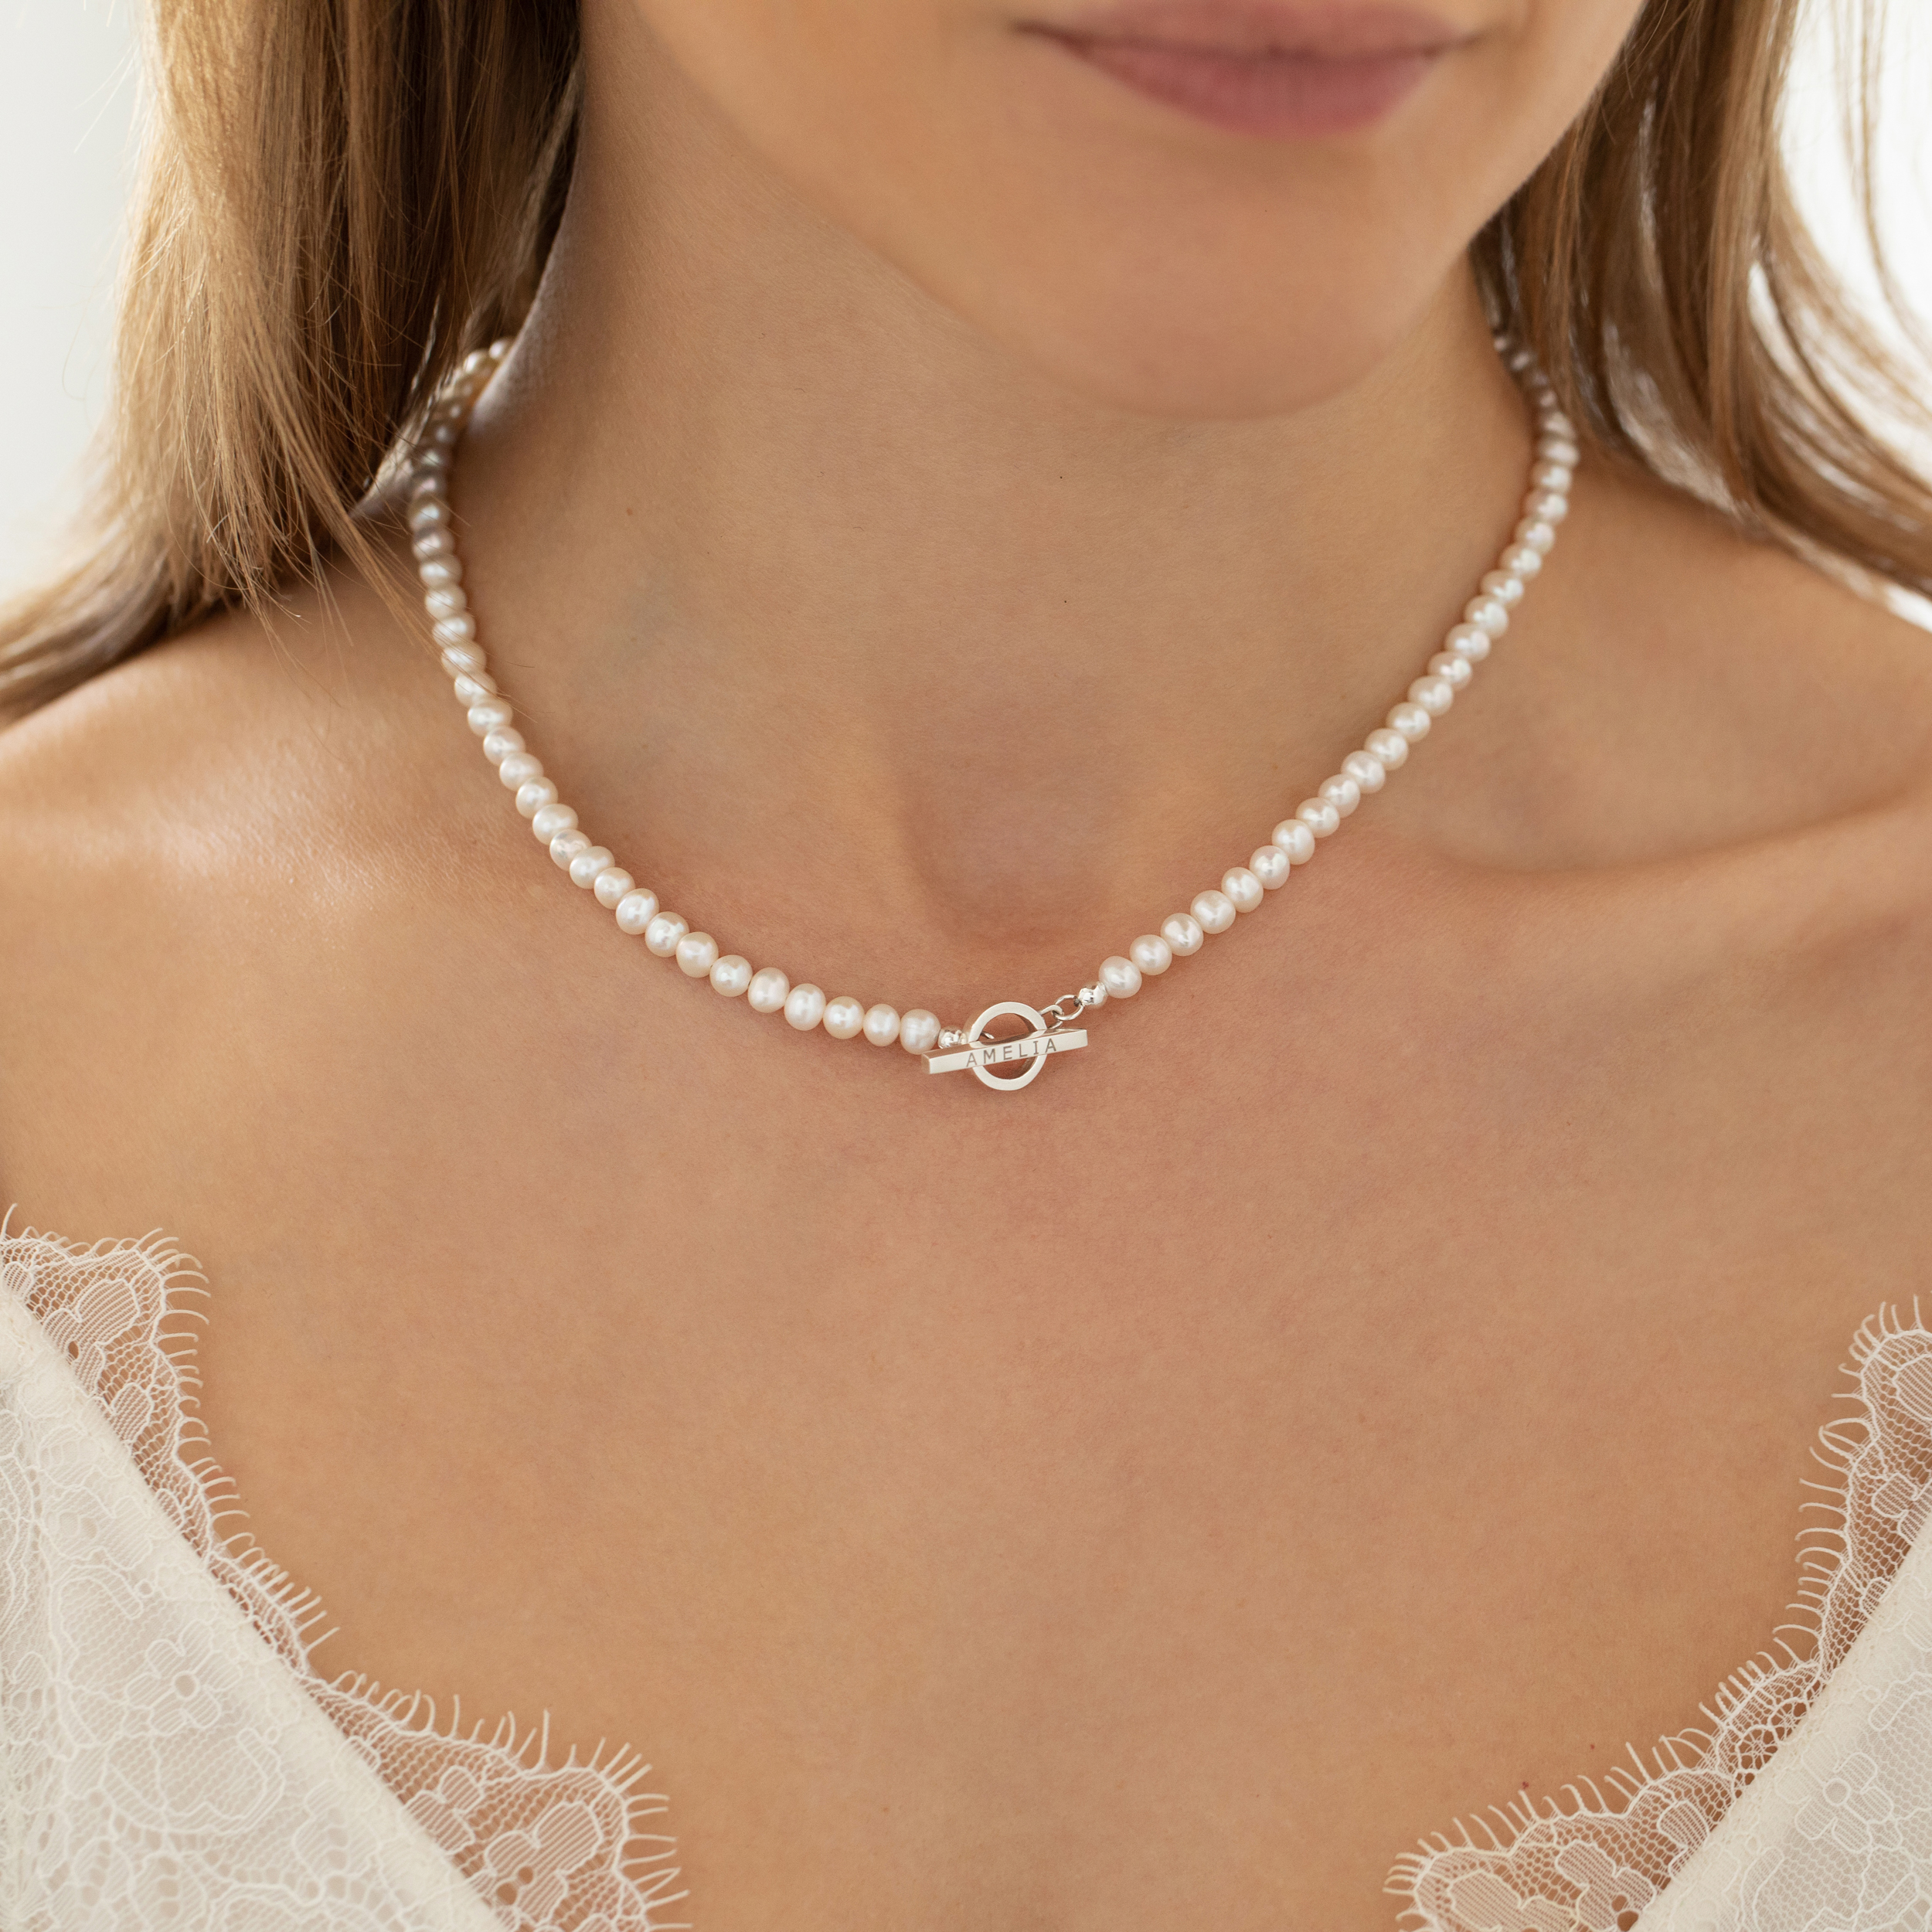 Timeless Beauty: Pearl Necklaces Beyond Trends